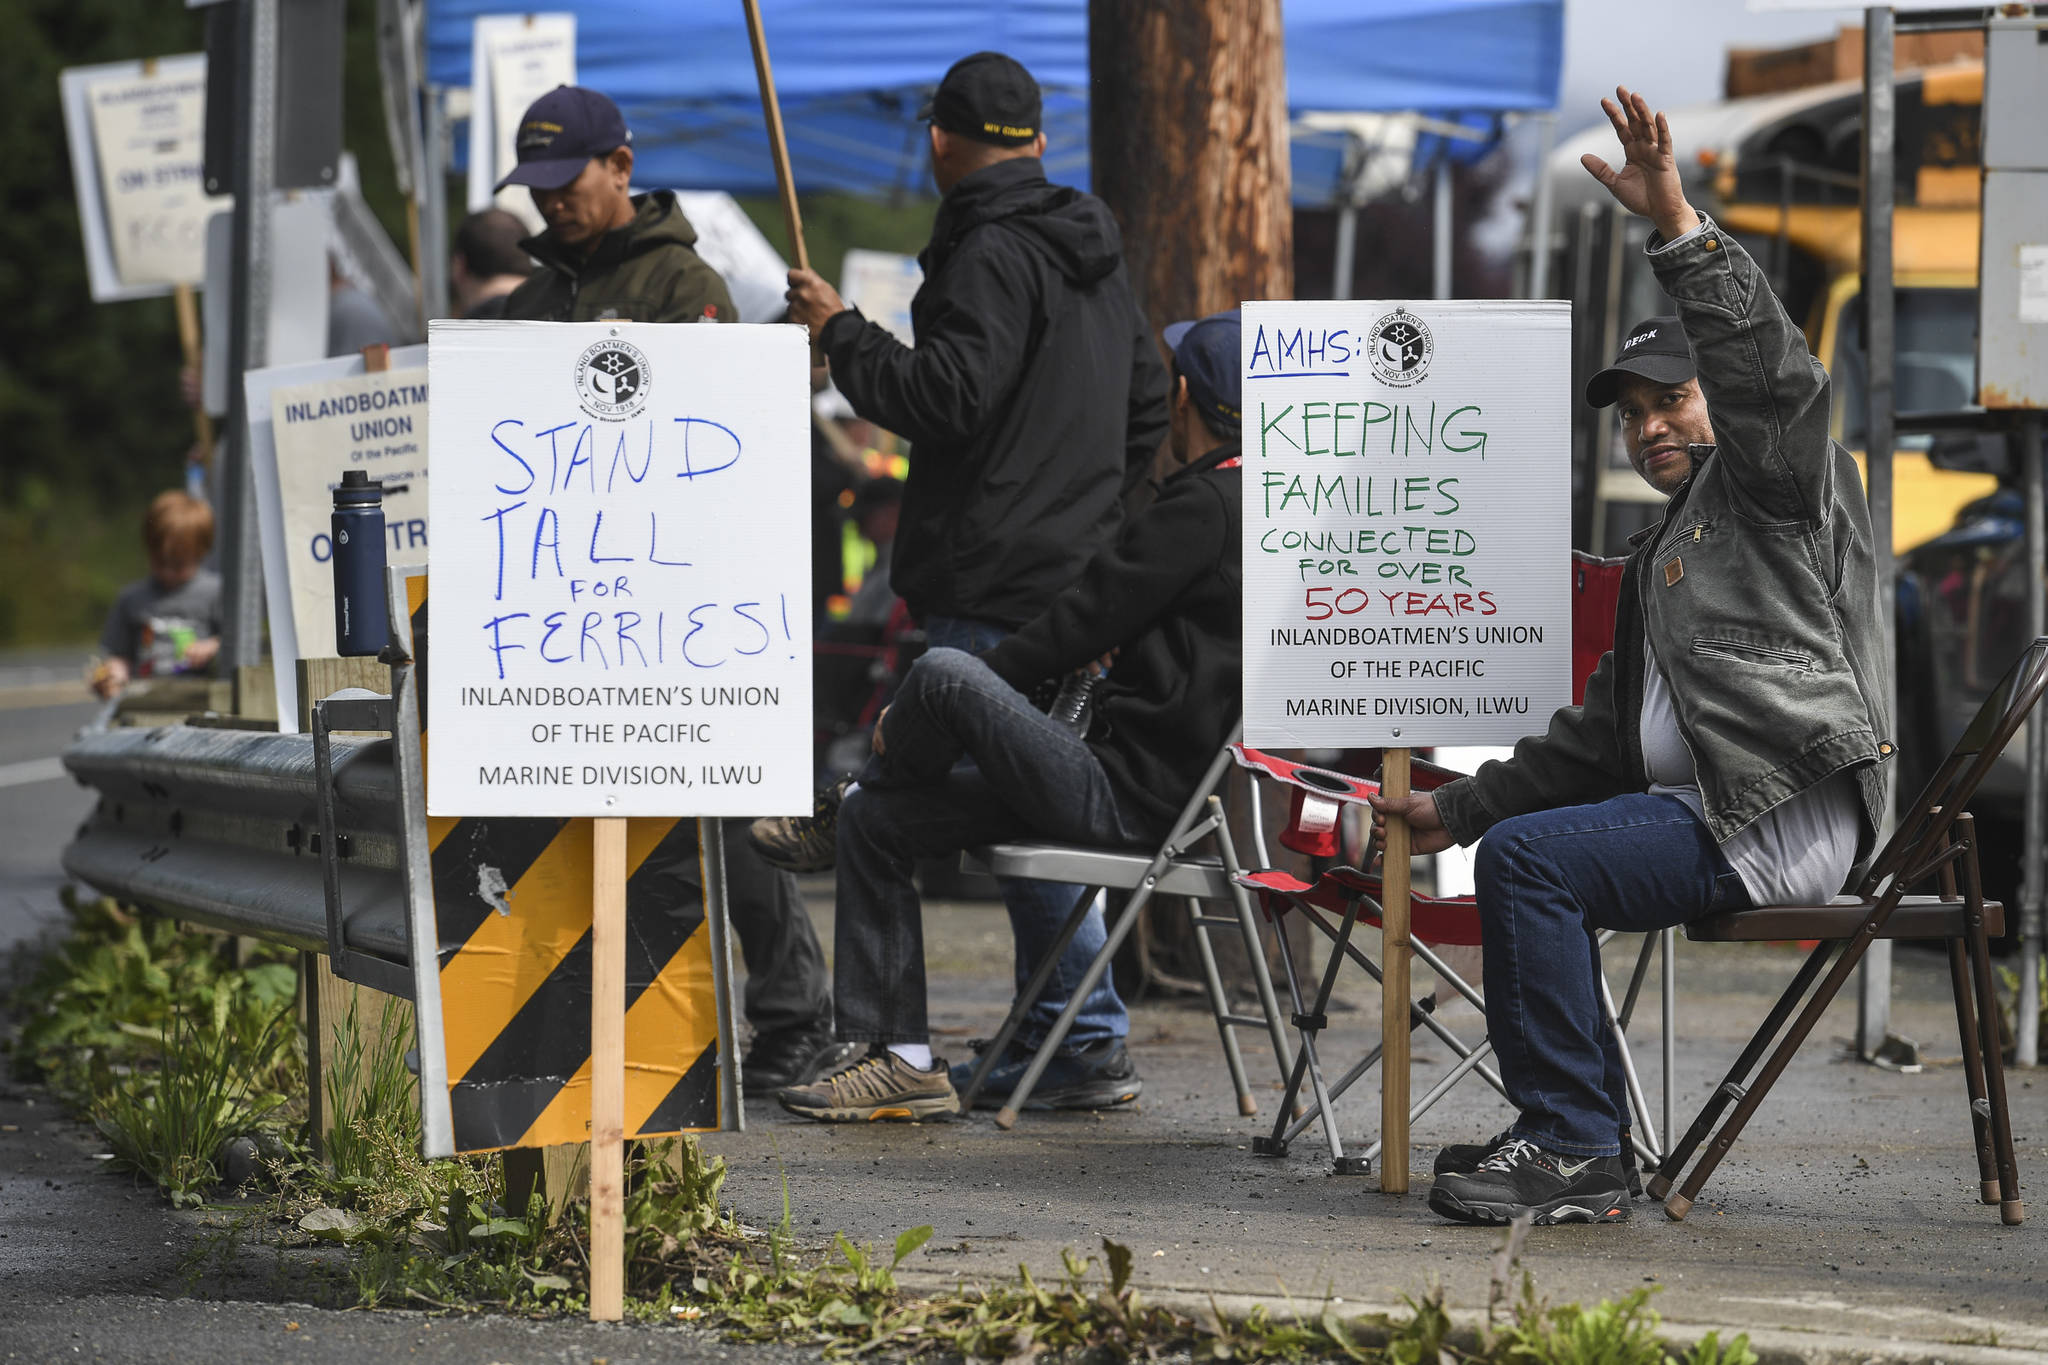 Neil Calberon, right, mans the picket line with others on the third day of the Inland Boatmen’s Union of the Pacific’s strike against the Alaska Marine Highway System at the Auke Bay Terminal on Friday, July 26, 2019. (Michael Penn | Juneau Empire)